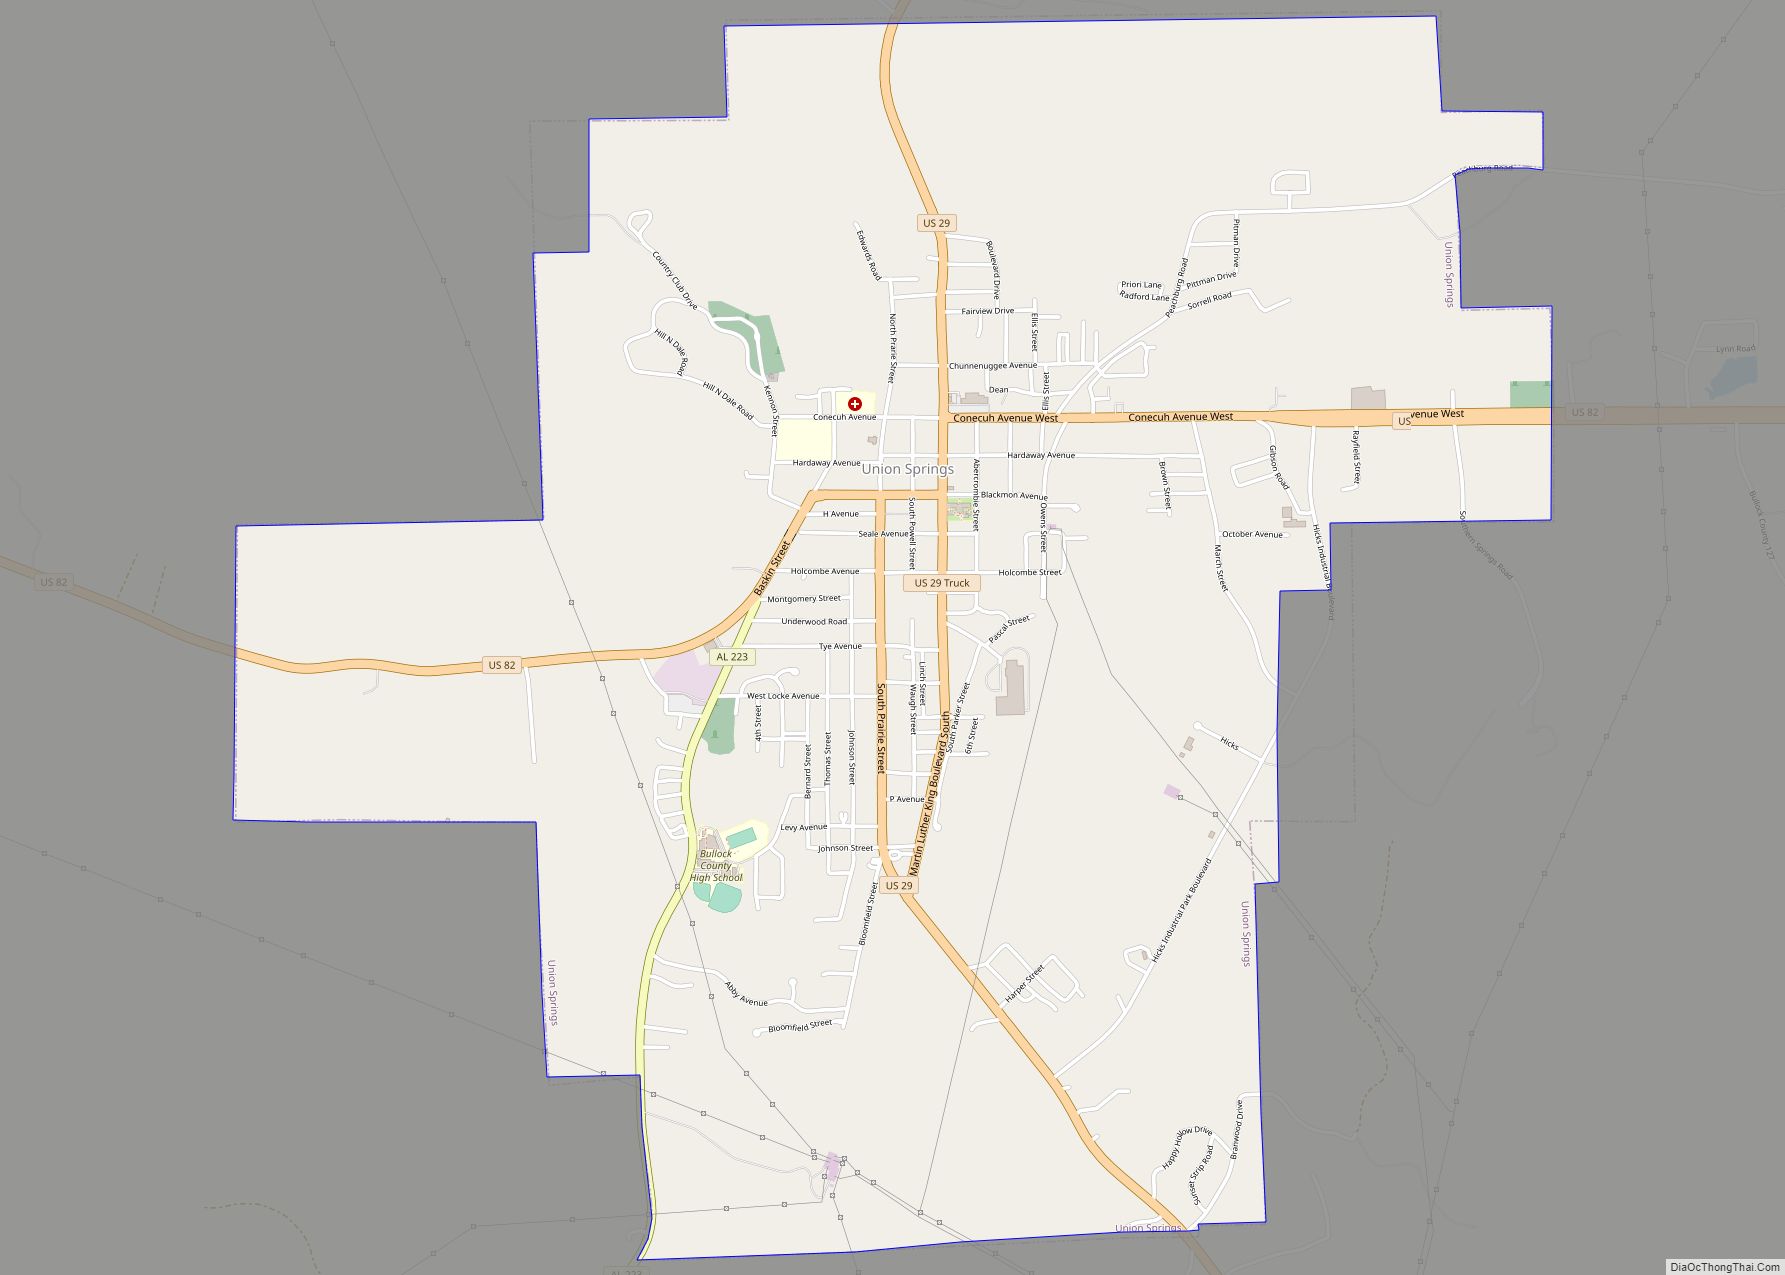 Map of Union Springs city